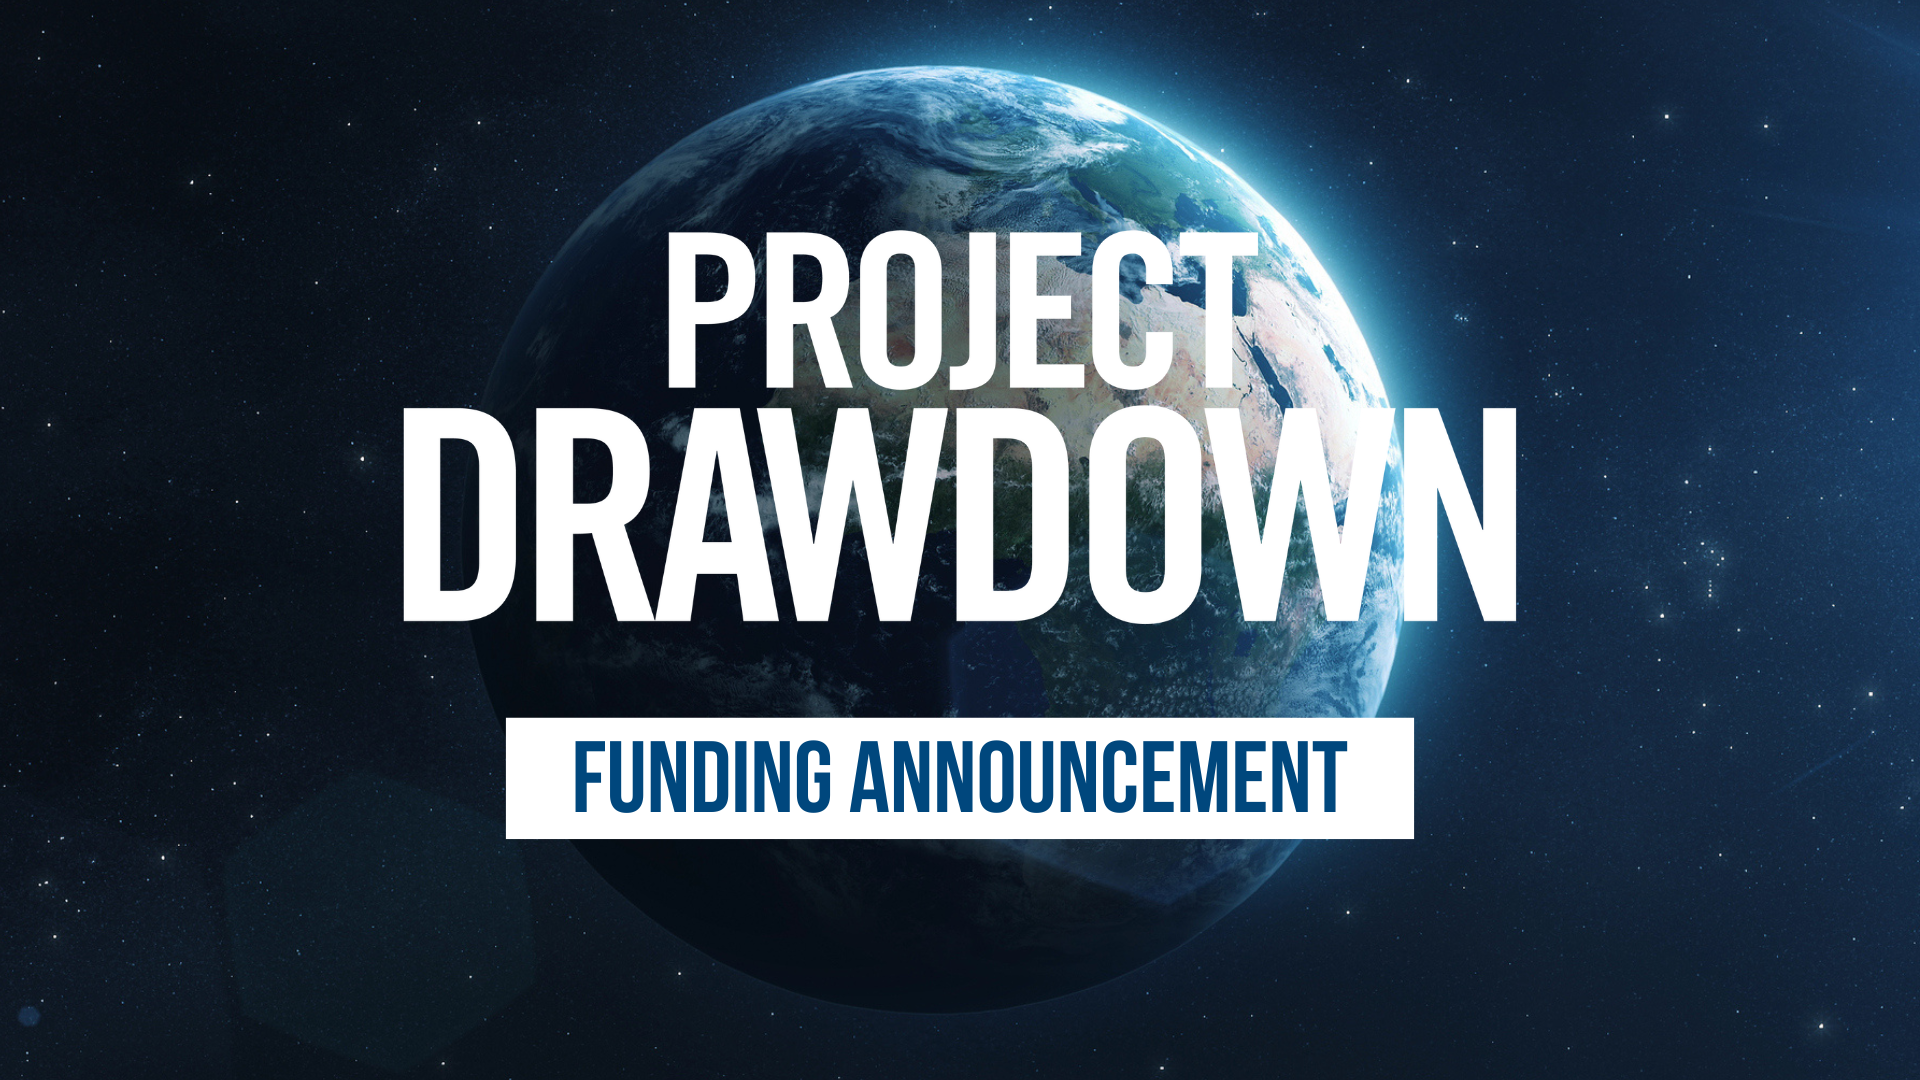 An image of Earth with the text Project Drawdown Funding Announcement overlaid